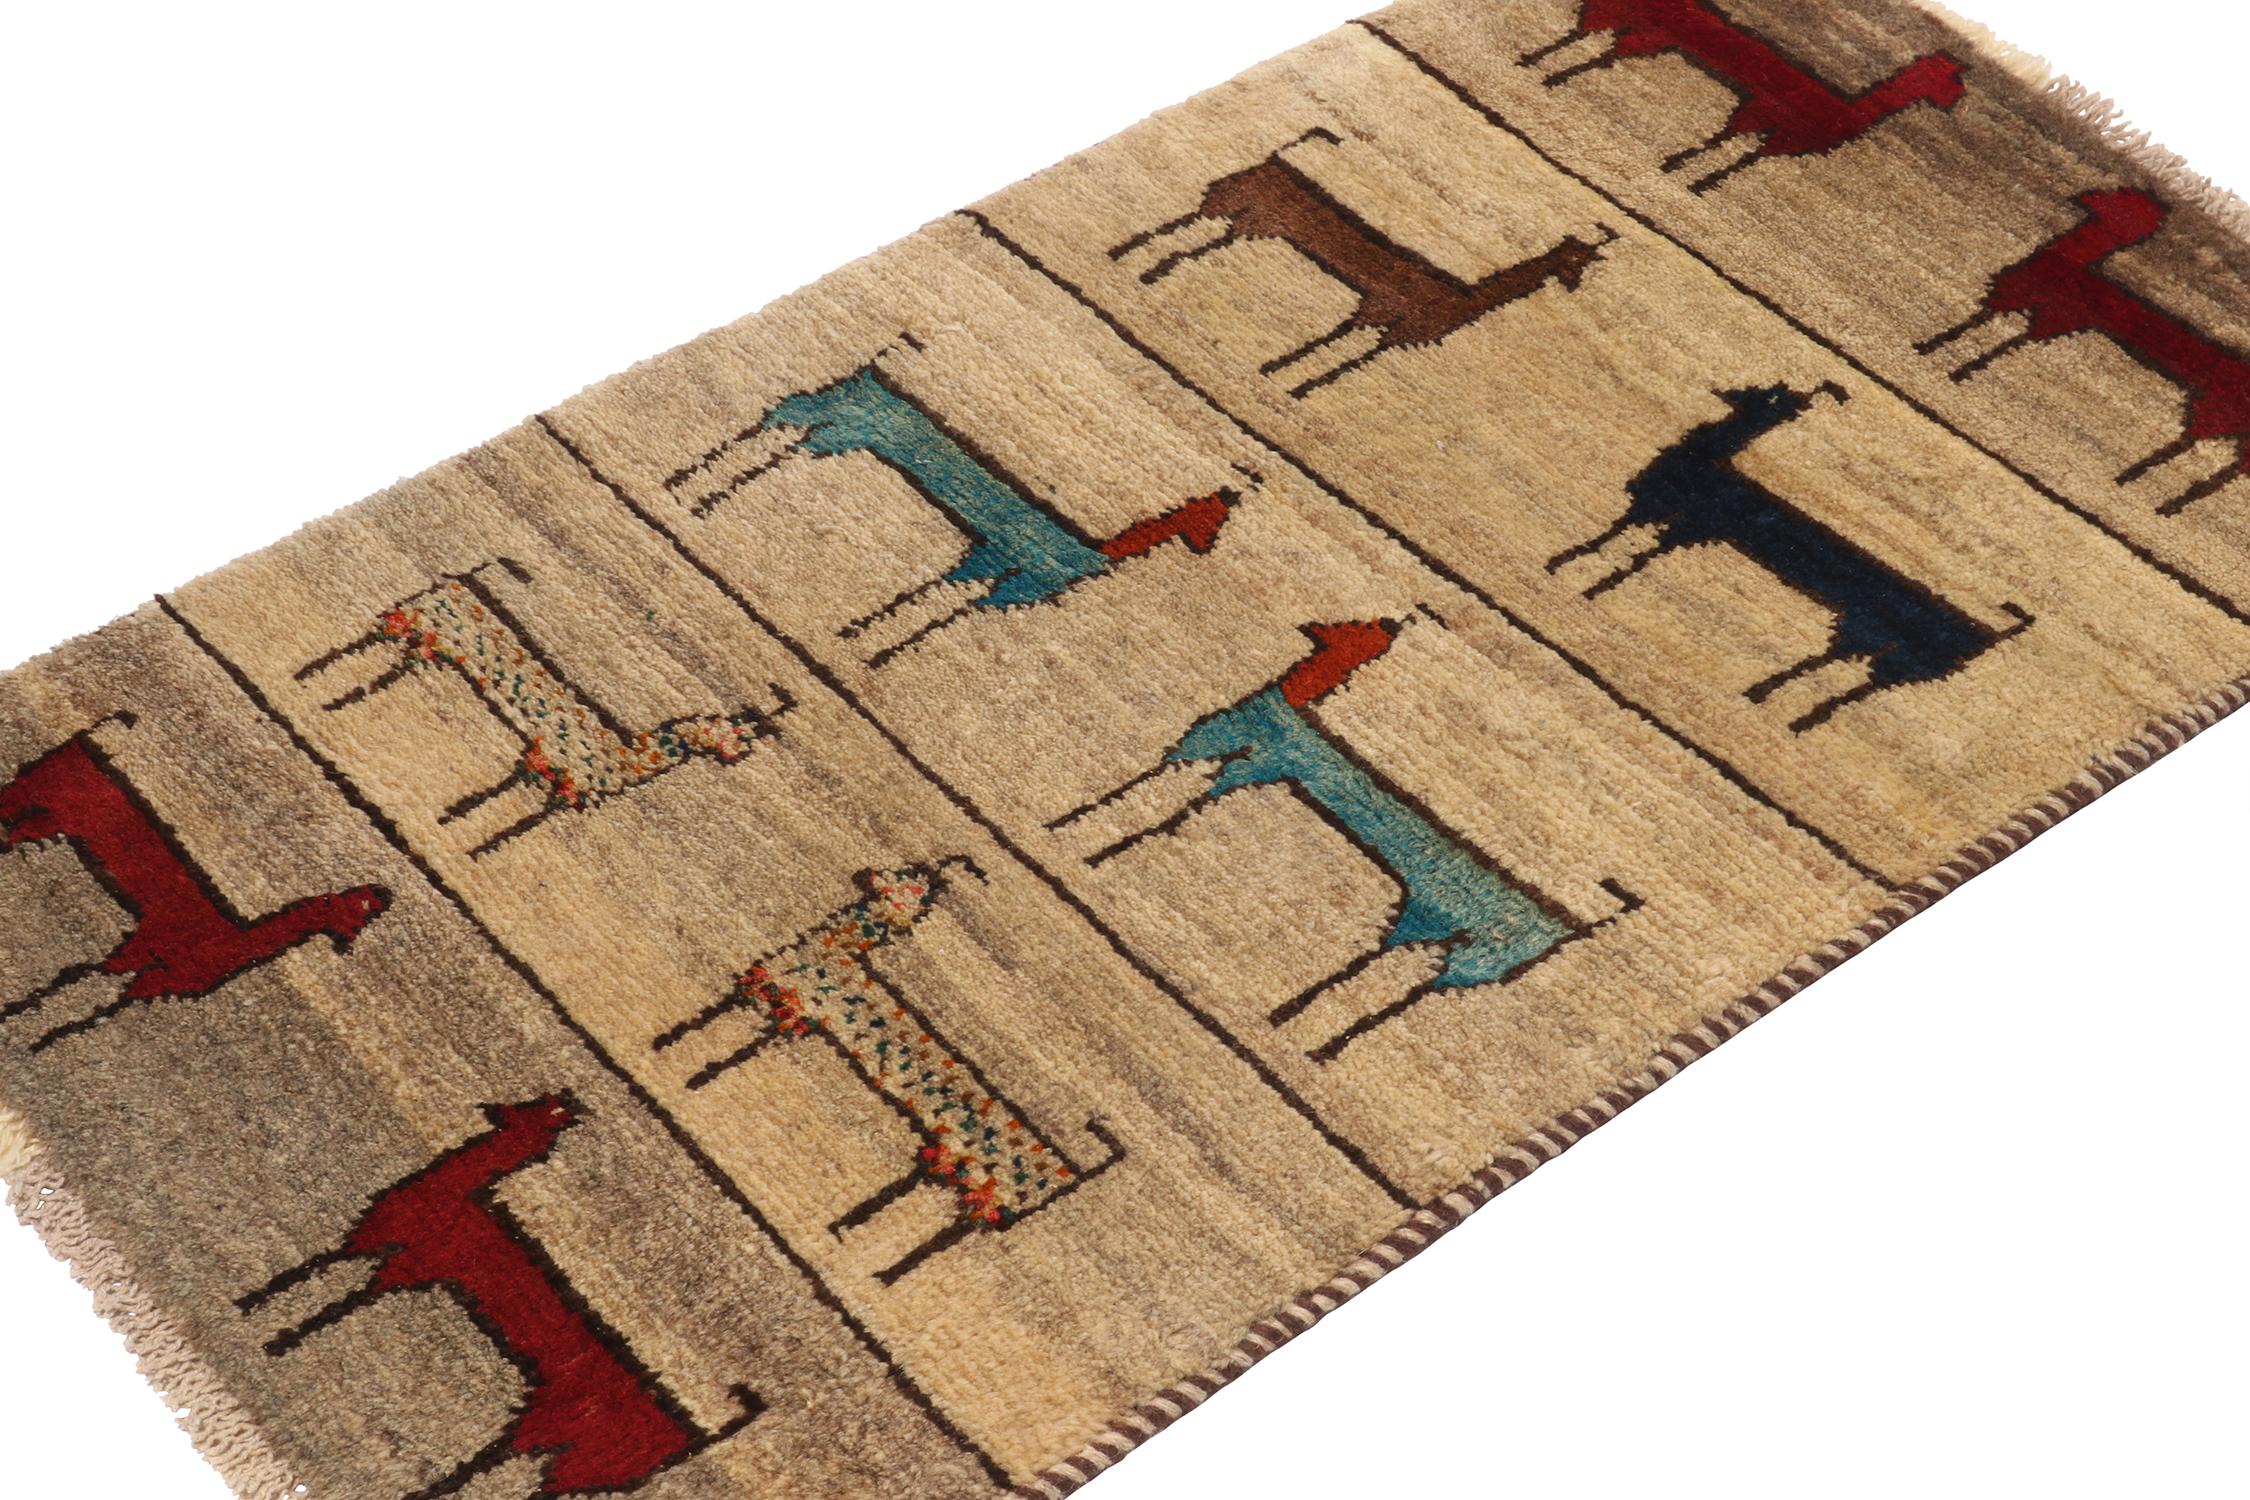 A vintage 2x3 Persian Gabbeh rug, from a grand entry to Rug & Kilim’s curation of rare tribal pieces. Hand-knotted in wool circa 1950-1960. 

On the Design: 

This mid-century piece features colorful animal pictorials in red, blue and brown atop